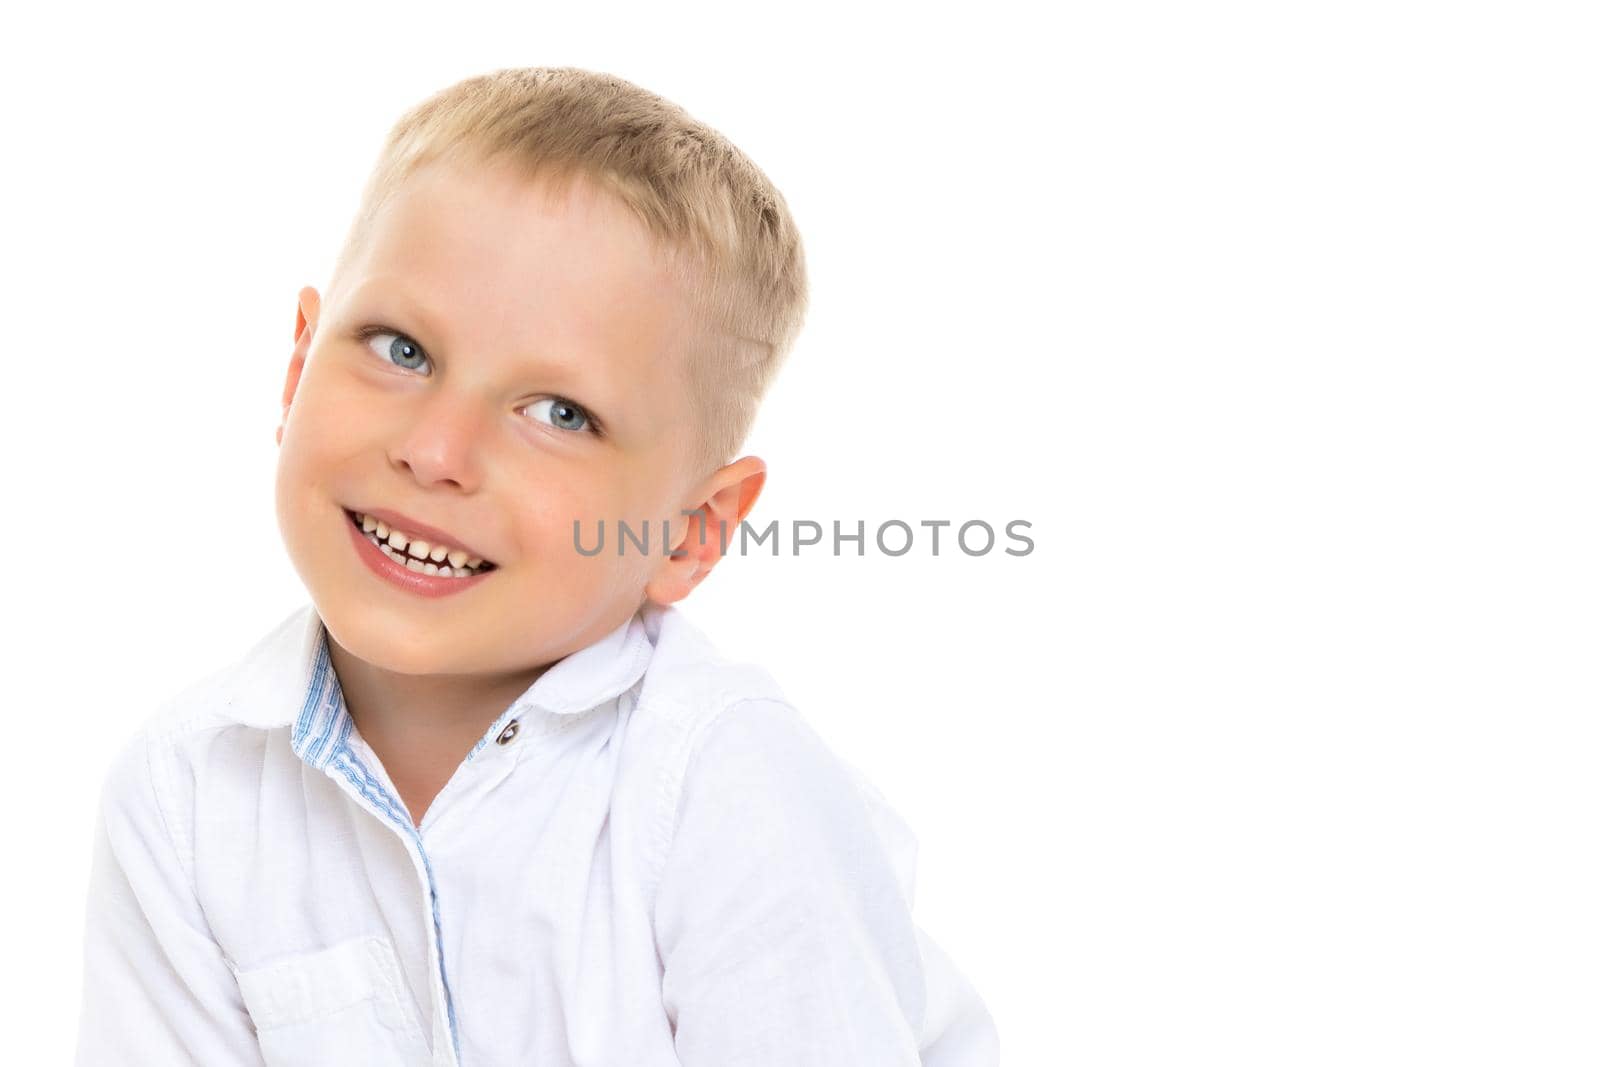 Smiling little boy, studio portrait on white background. The concept of a happy childhood, well-being in the family. Close-up. Isolated.